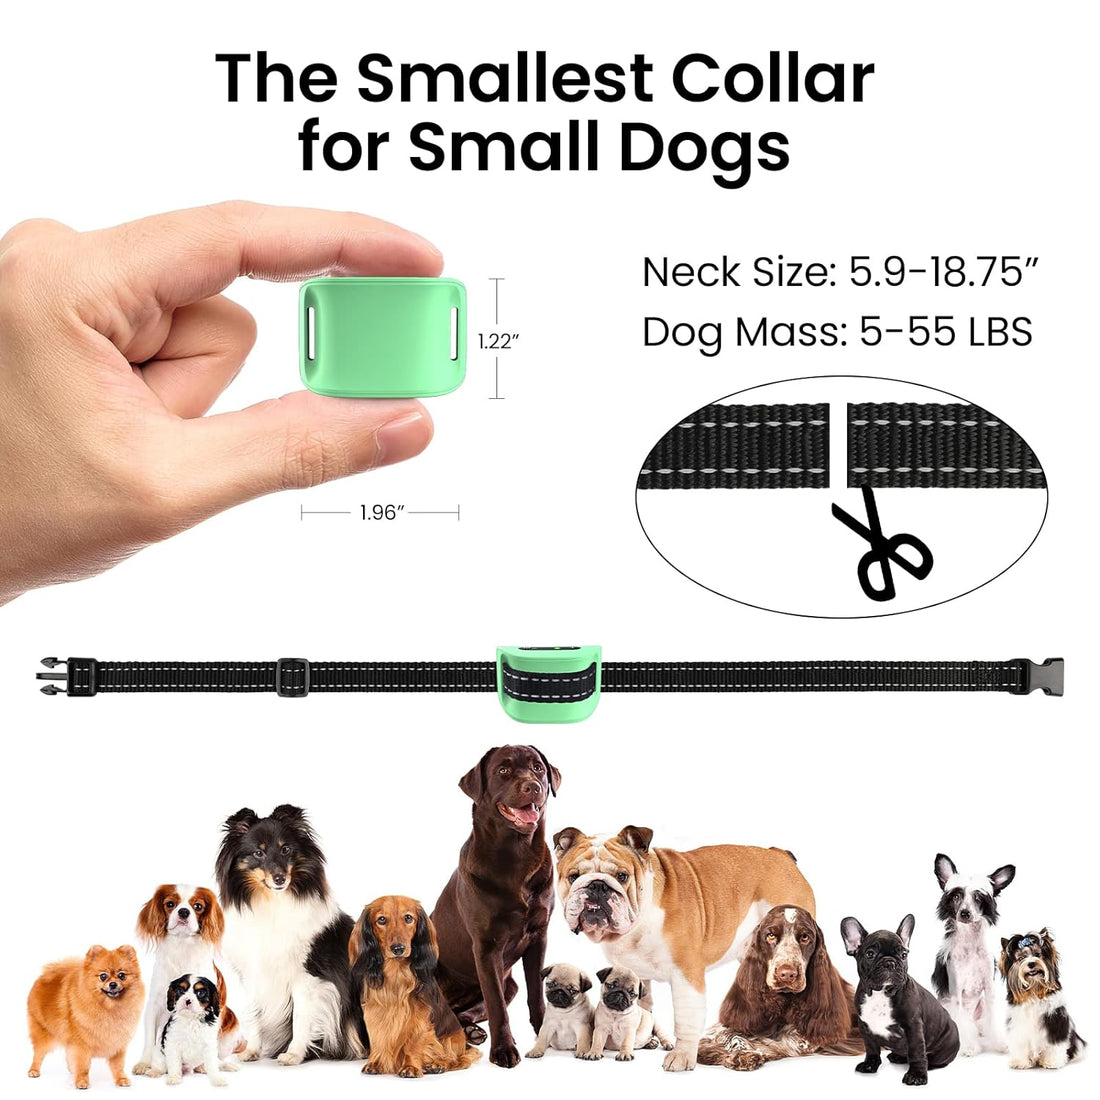 MASBRILL Small Dog Bark Collar-Anti Barking Collar for Dogs-Rechargeable No Shock Bark Collars with Adjustable Sensitivity and Intensity Beep Vibration Bark Control Collar for Small Medium Puppy Dogs